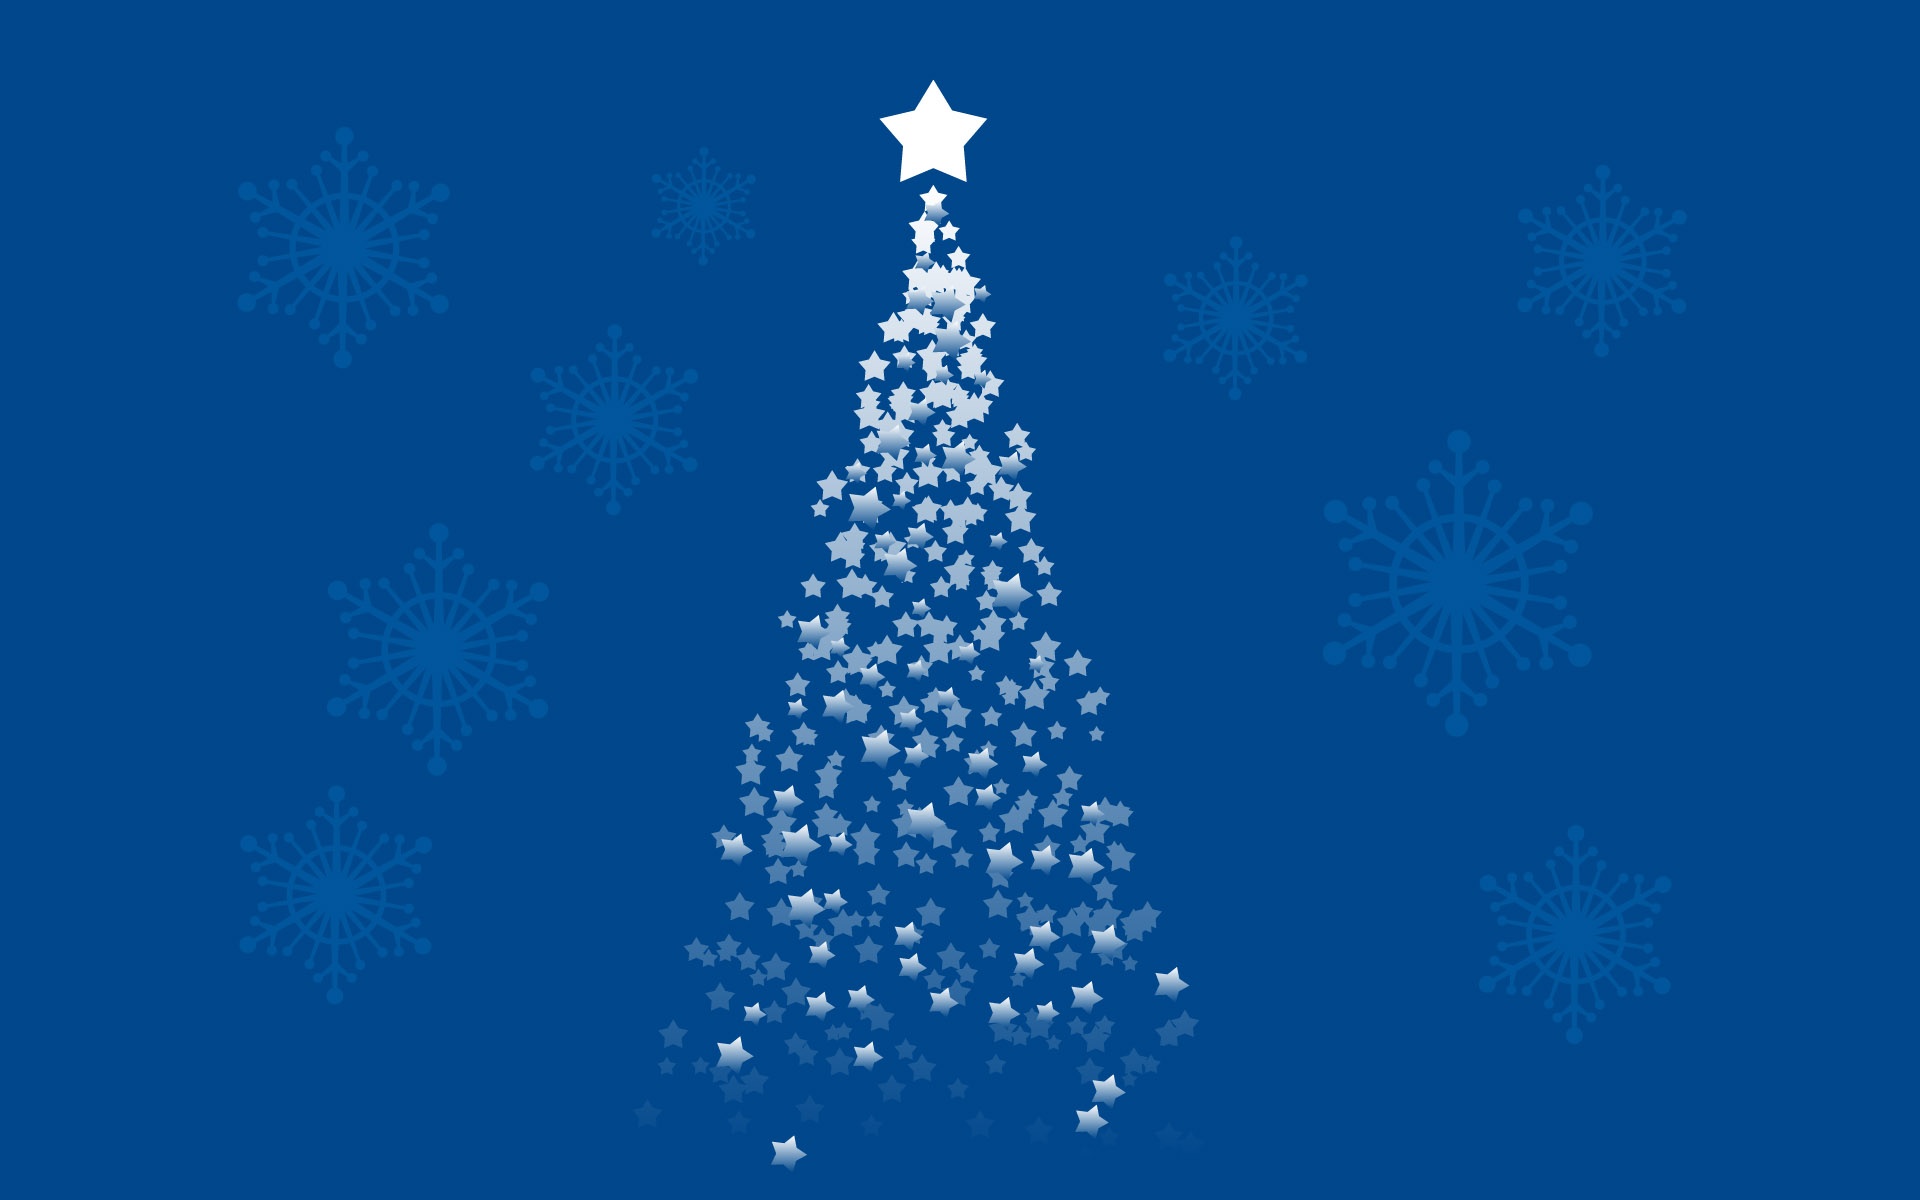 Free Download 19x10 Blue Stars Christmas Tree Desktop Pc And Mac Wallpaper 19x10 For Your Desktop Mobile Tablet Explore 50 Weihnachtsbaum Wallpaper Weihnachtsbaum Wallpaper